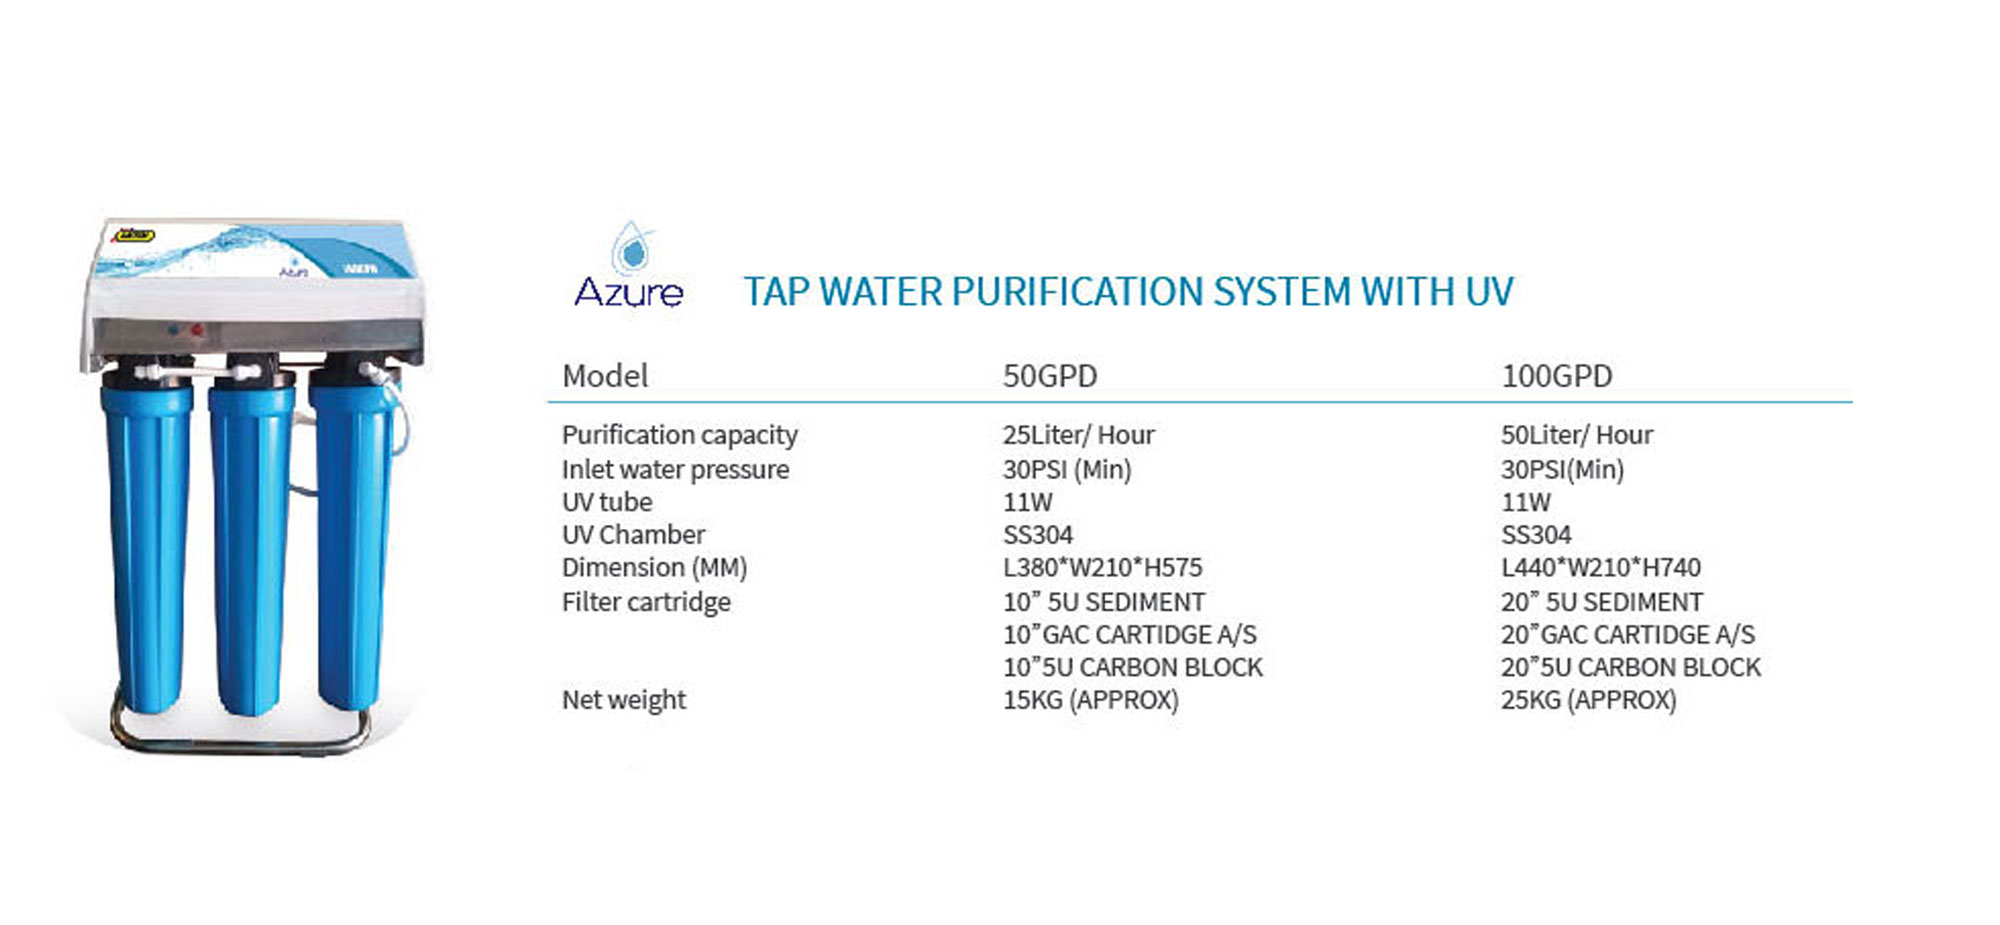 Tap water purification system with UV